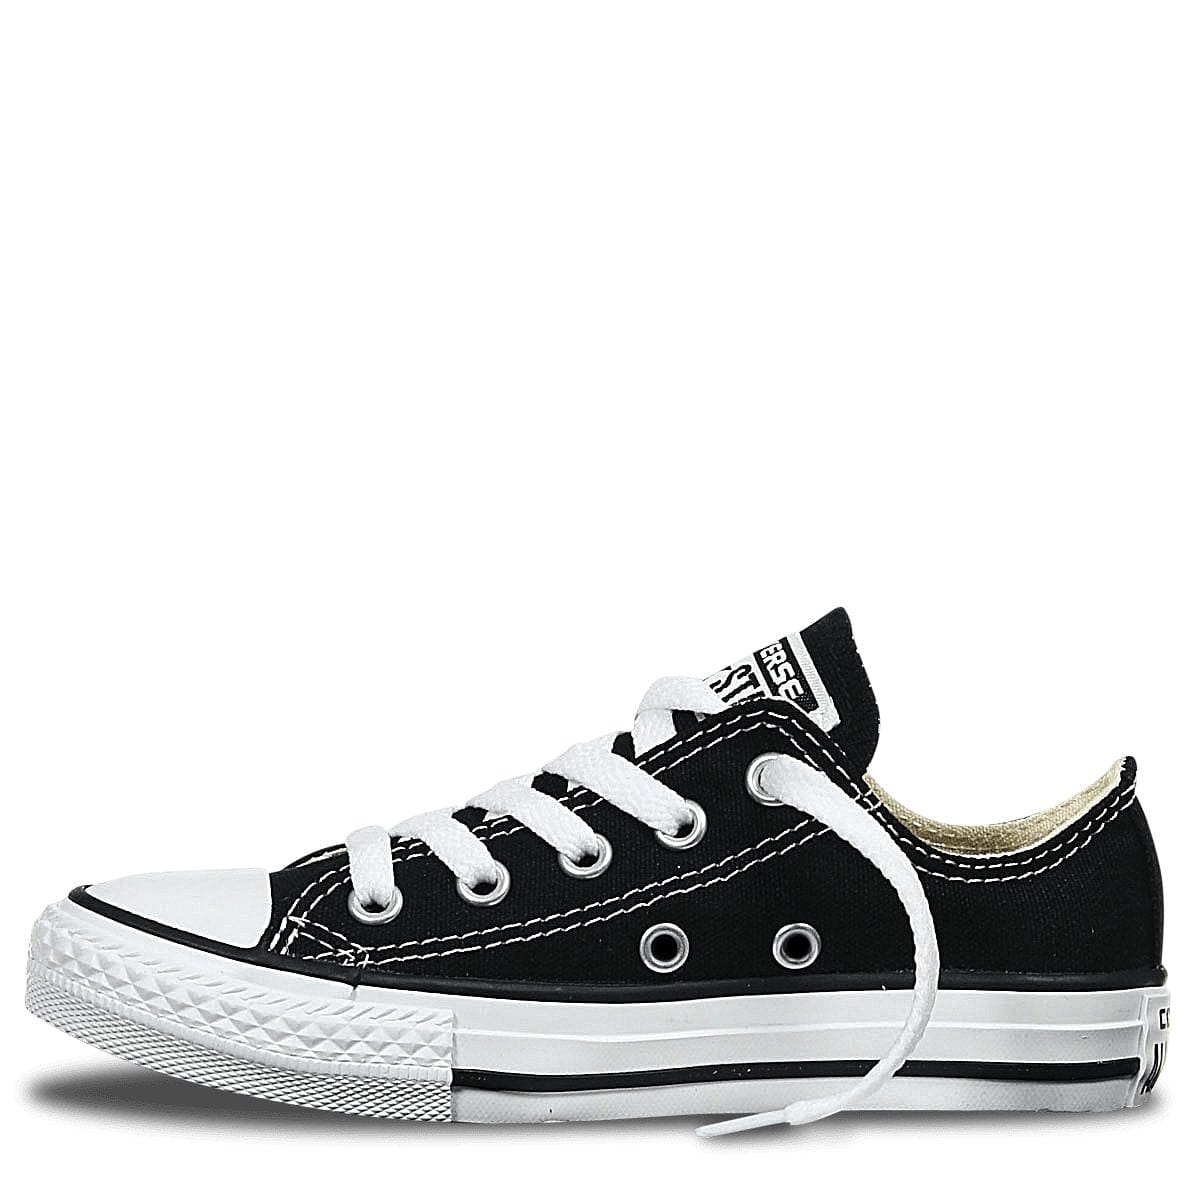 Converse CONVERSE TODDLER'S CHUCK TAYLOR ALL STAR LOW TOP BLACK/WHITE SHOE - INSPORT